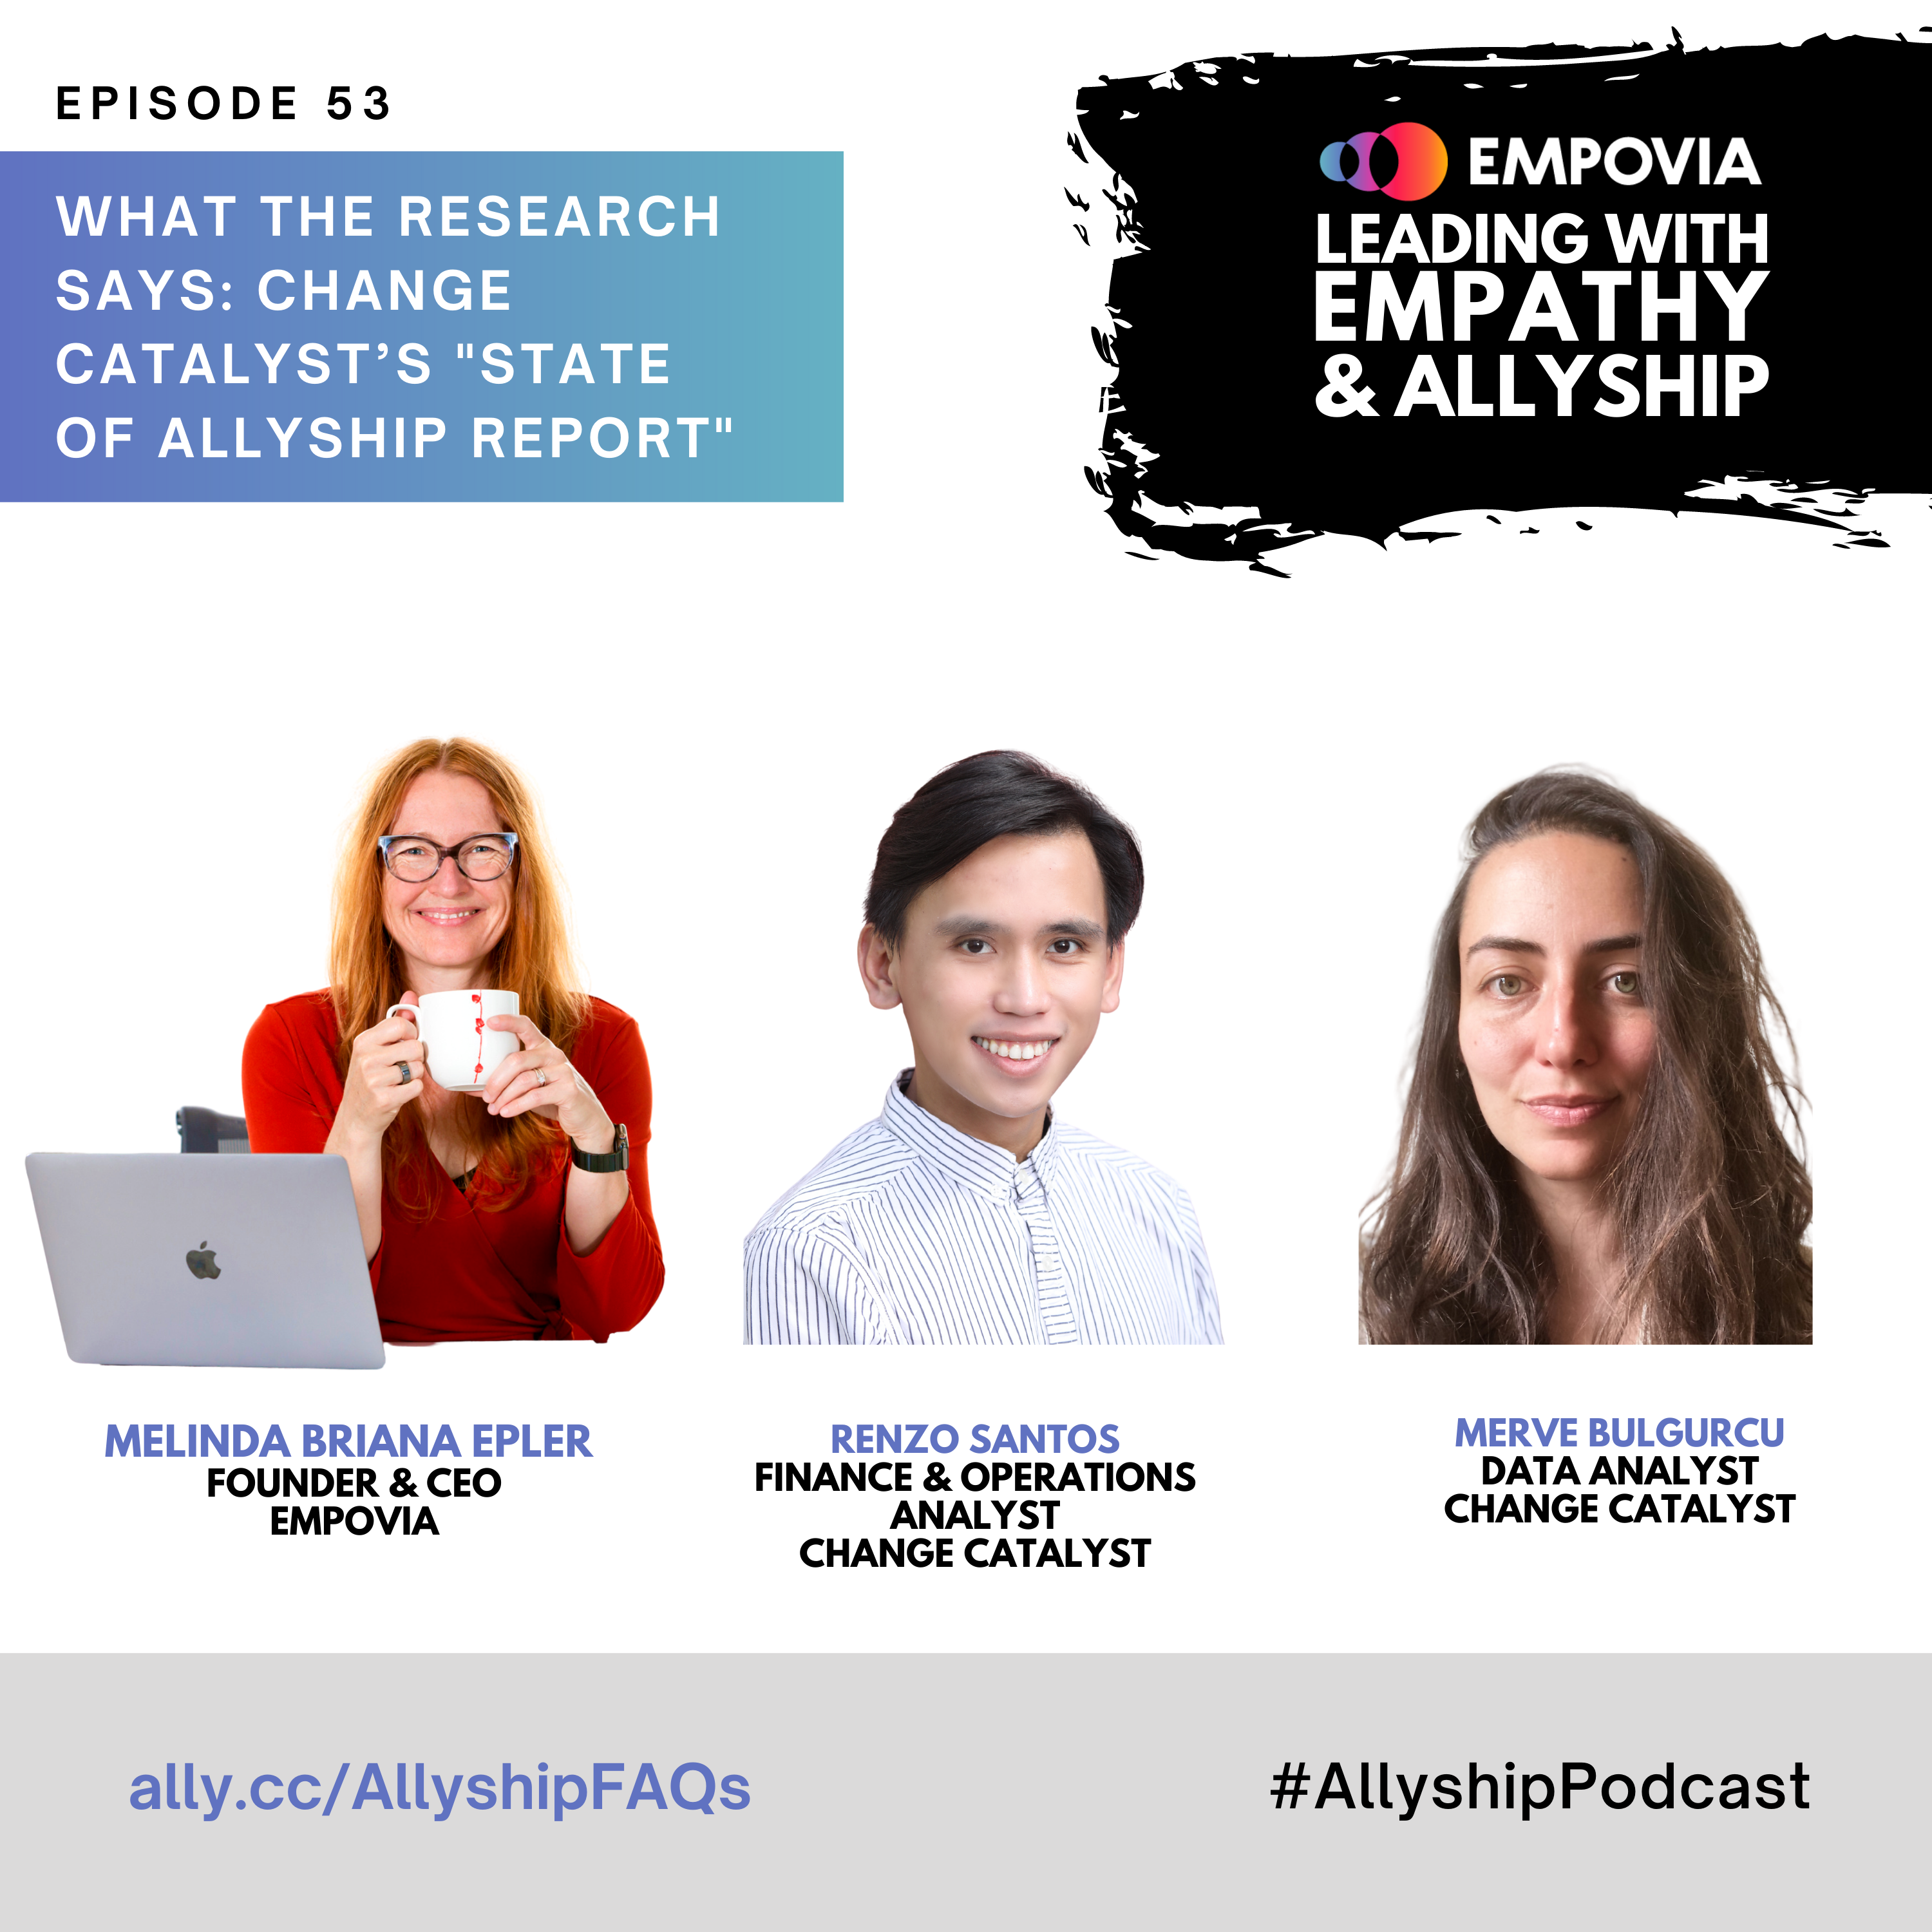 Leading With Empathy & Allyship promo with the Empovia logo and photos of host Melinda Briana Epler, a White woman with red hair, glasses, and red shirt holding a white mug behind a laptop; Renzo Santos, a Filipino man with black hair and a white/gray striped shirt; and Merve Bulgurcu, a Turkish woman with long brown hair and a cream shirt.